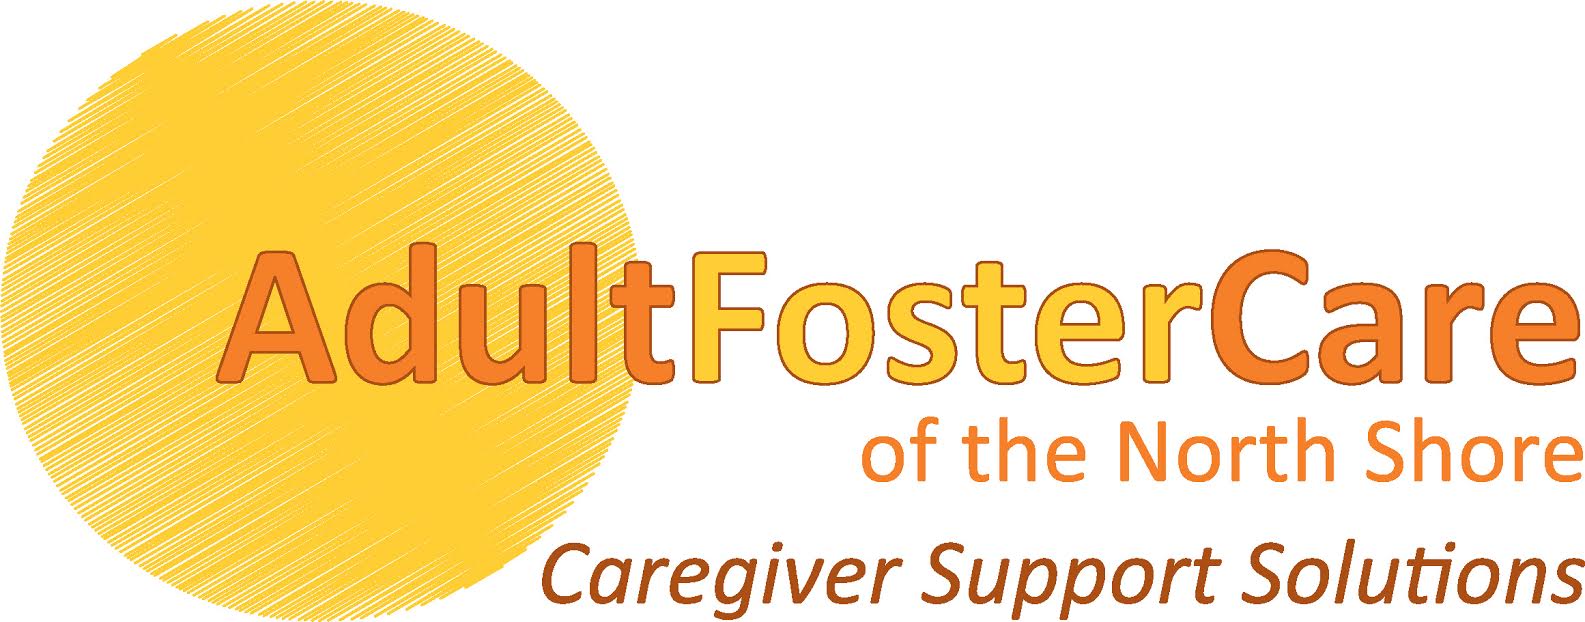 Adult Foster Care logo